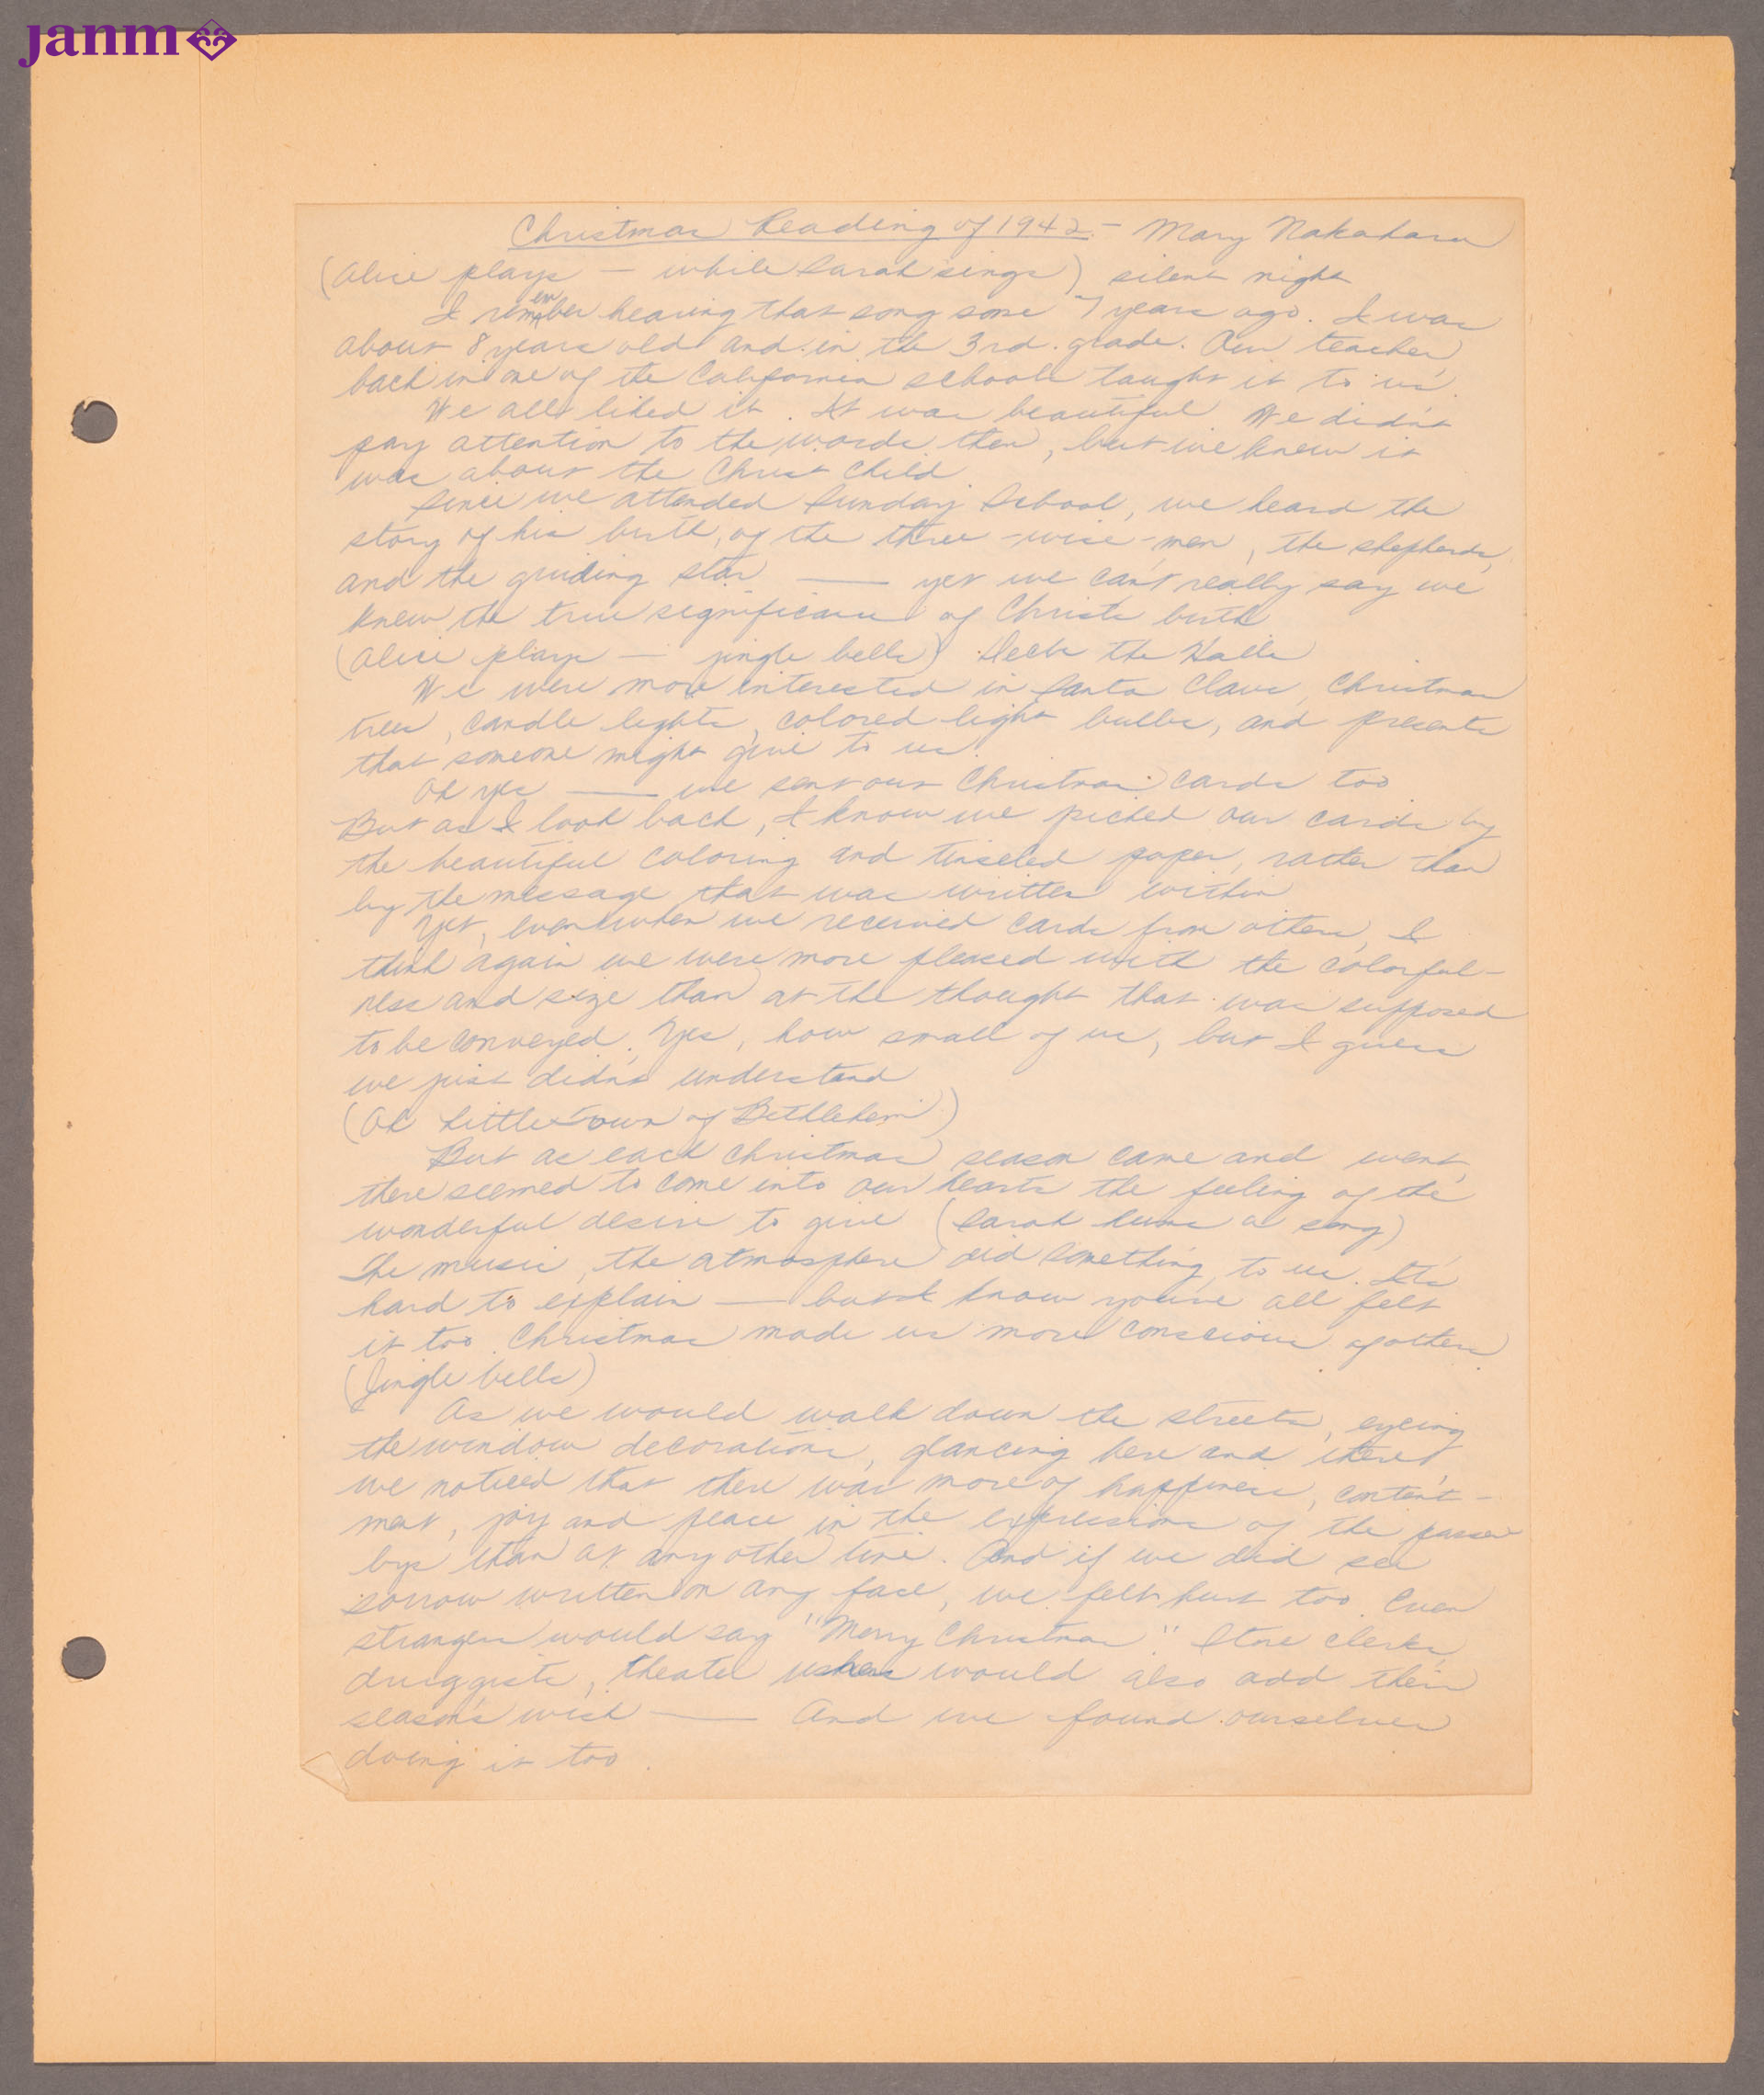 42r: 2-sided handwritten document by Mary Nakahara, entitled: 